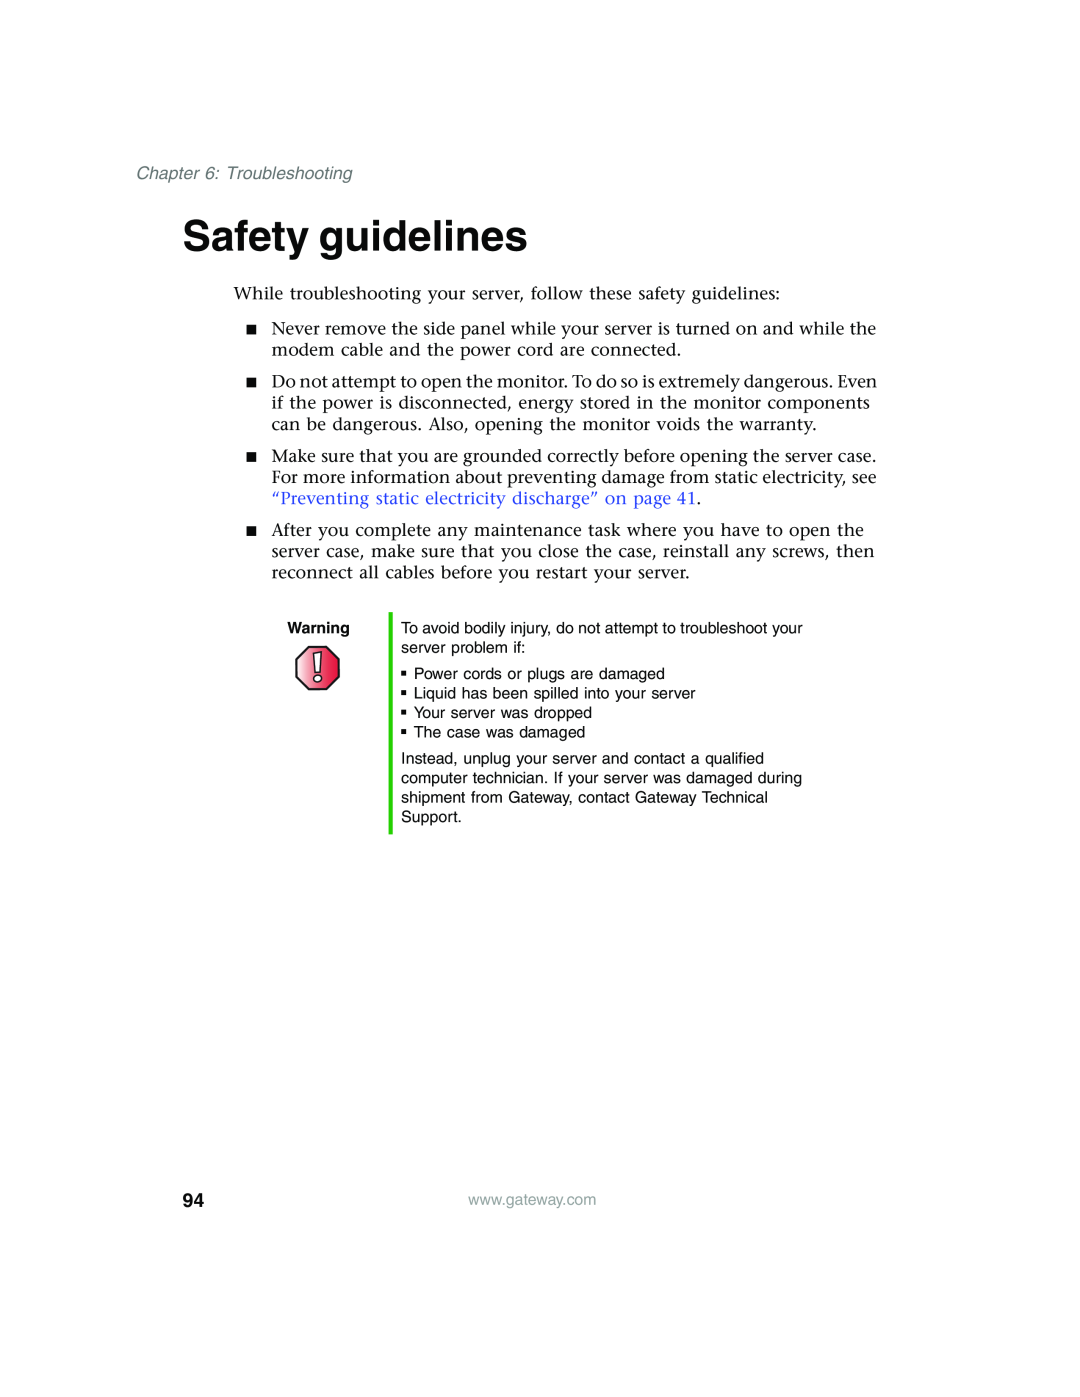 Gateway 960 manual Safety guidelines, Troubleshooting 